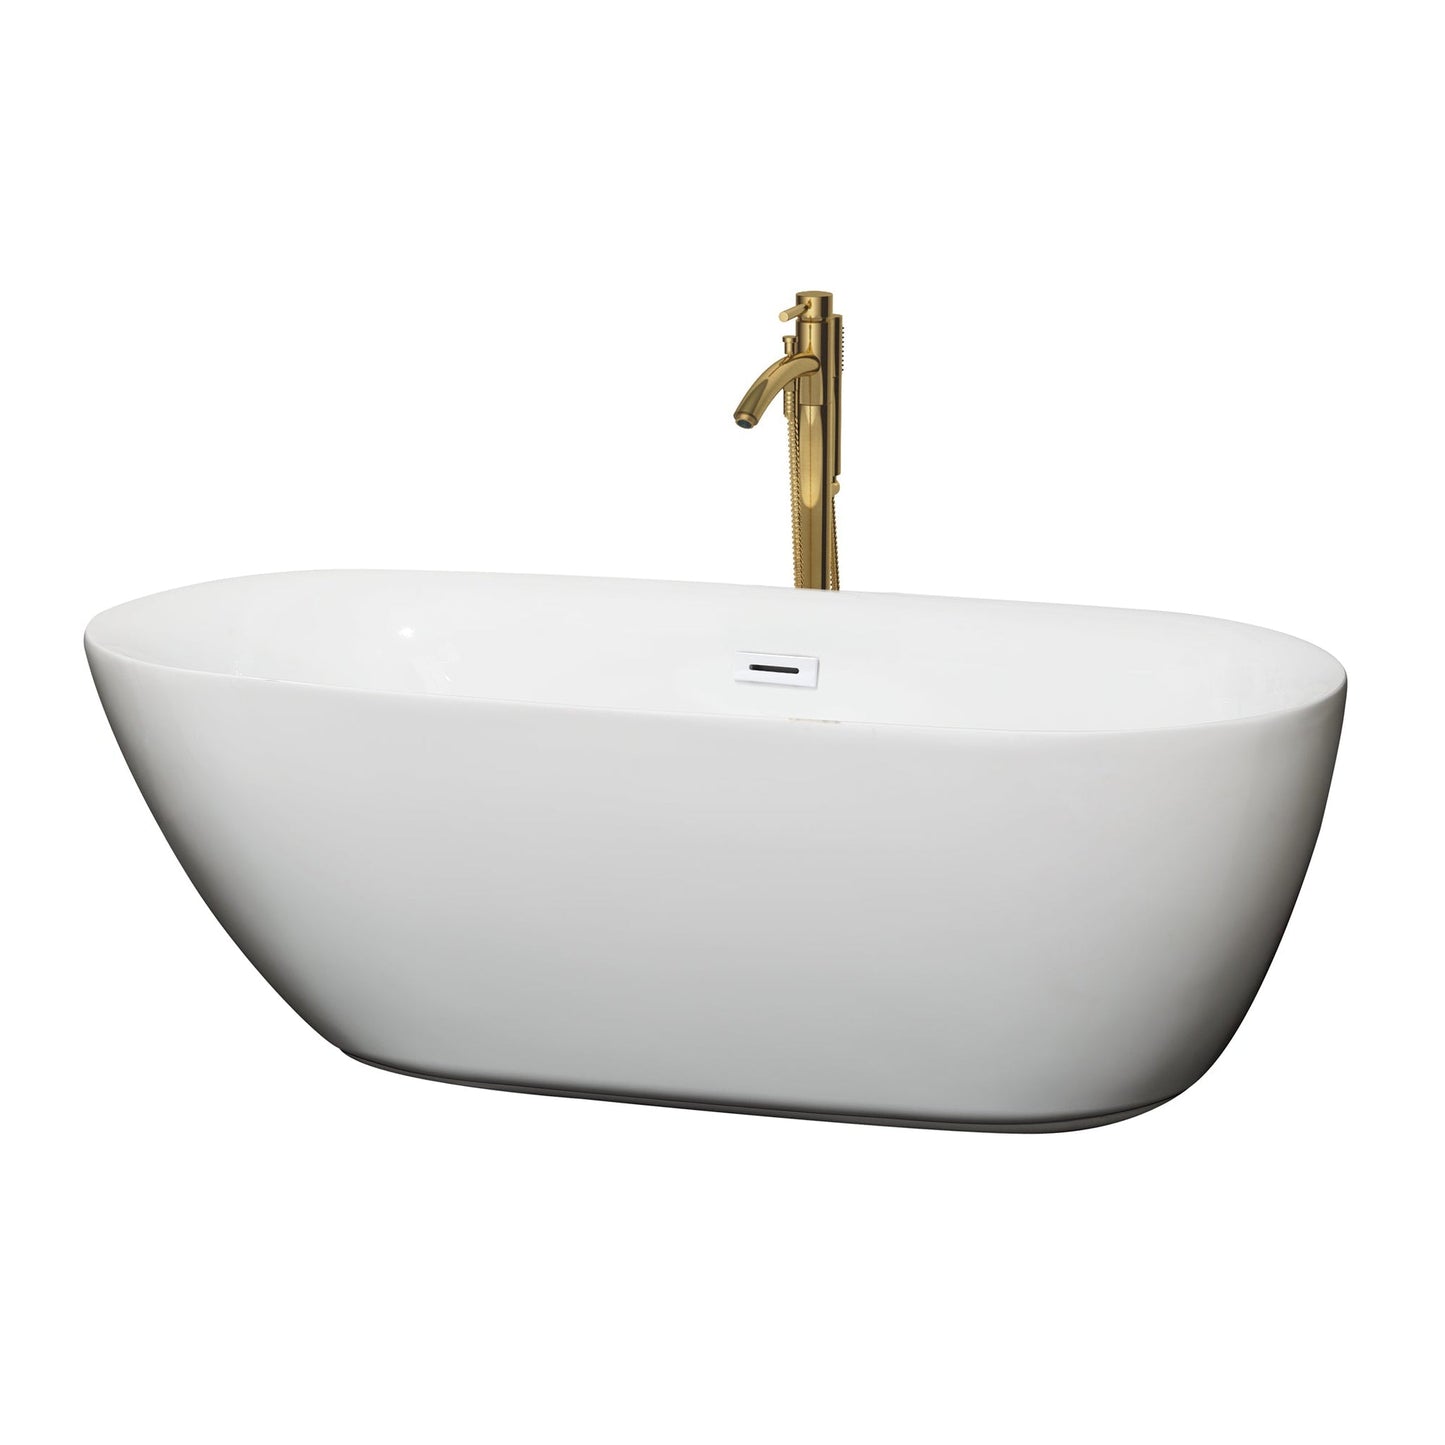 Wyndham Collection Melissa 65" Freestanding Bathtub in White With Shiny White Trim and Floor Mounted Faucet in Brushed Gold